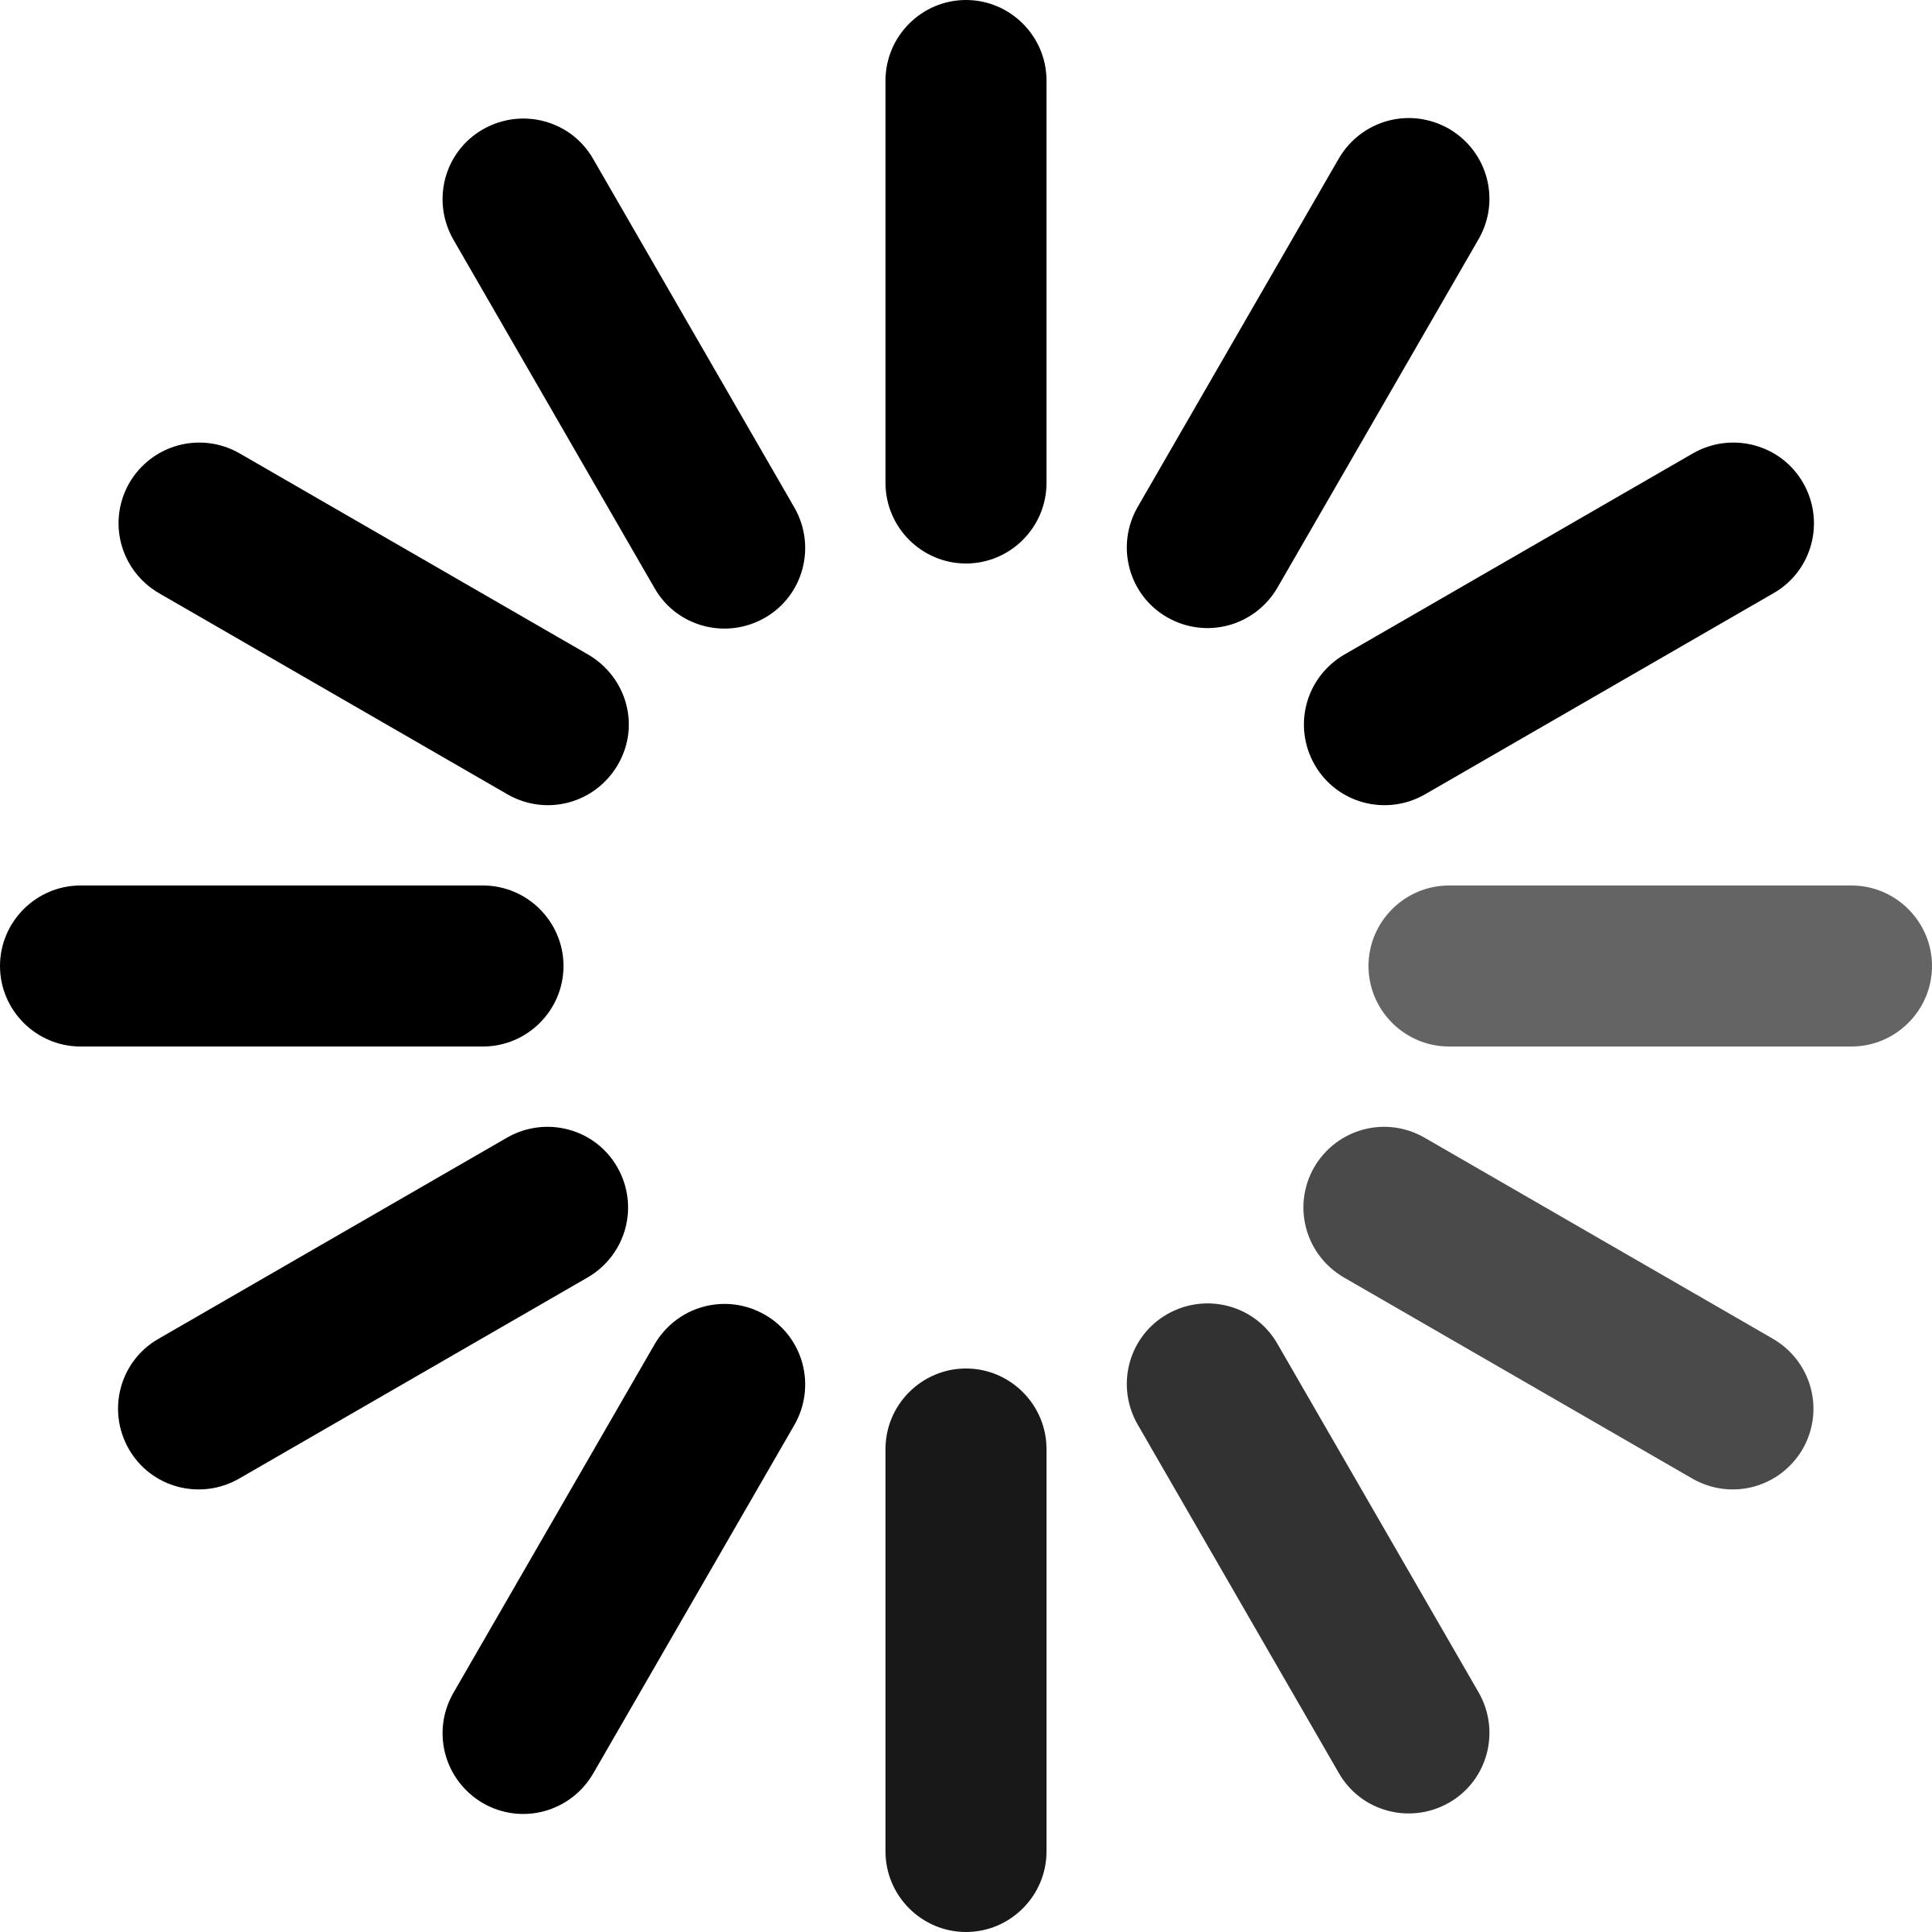 Circular Loading Icon With Dashes And Some Fading Out Png Icons In